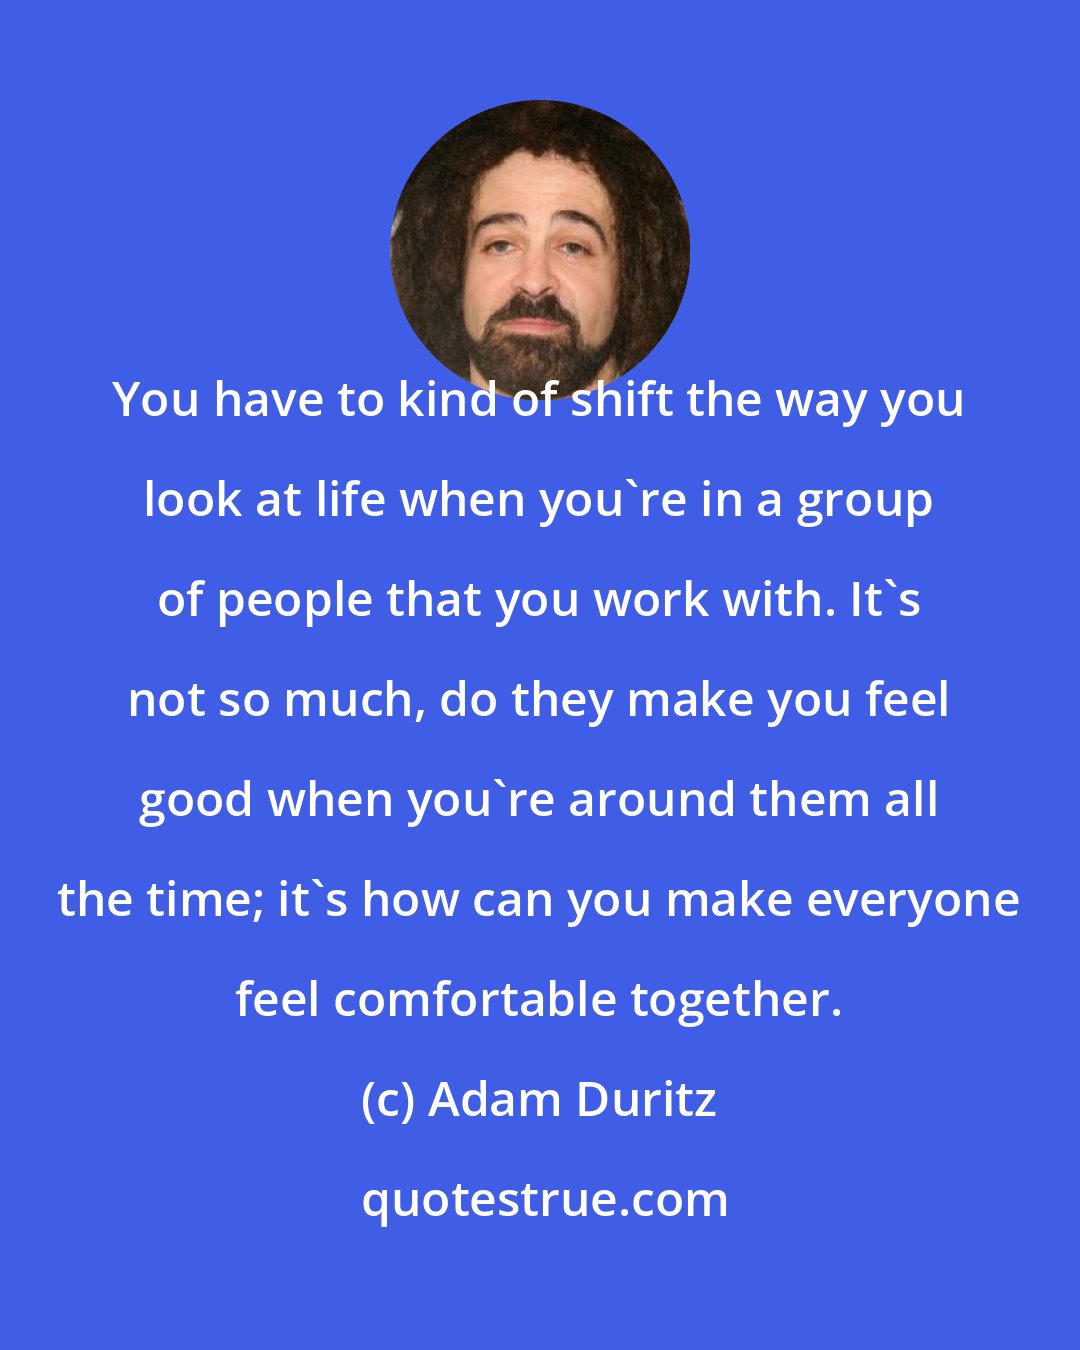 Adam Duritz: You have to kind of shift the way you look at life when you're in a group of people that you work with. It's not so much, do they make you feel good when you're around them all the time; it's how can you make everyone feel comfortable together.